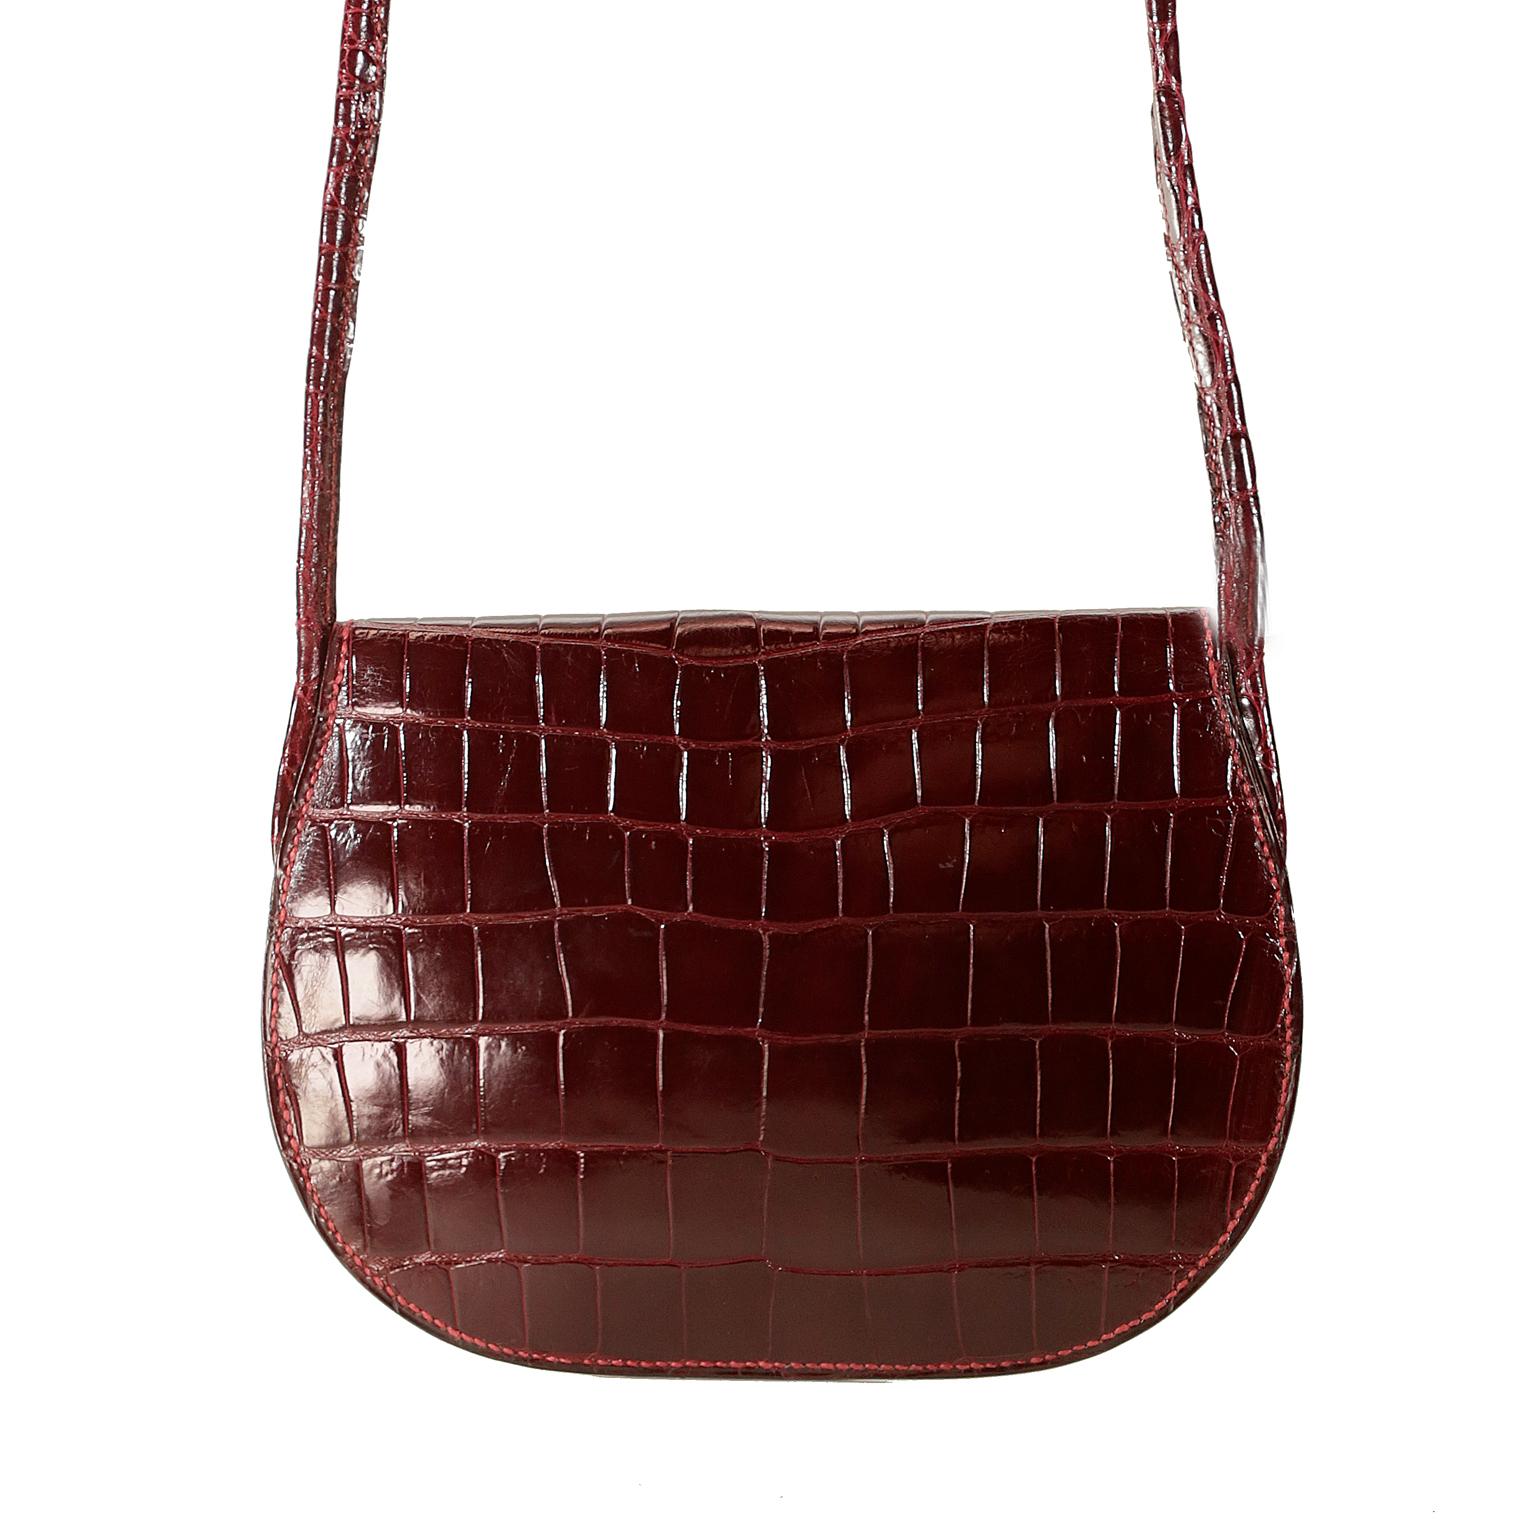 This authentic Hermès Vintage Bordeaux Crocodile Small Crossbody Bag is in excellent condition. 
Extremely rare custom ordered piece from 2000-2001.  Slim flap bag in rich Bordeaux crocodile skin with press snap closure.  Intricate equestrian